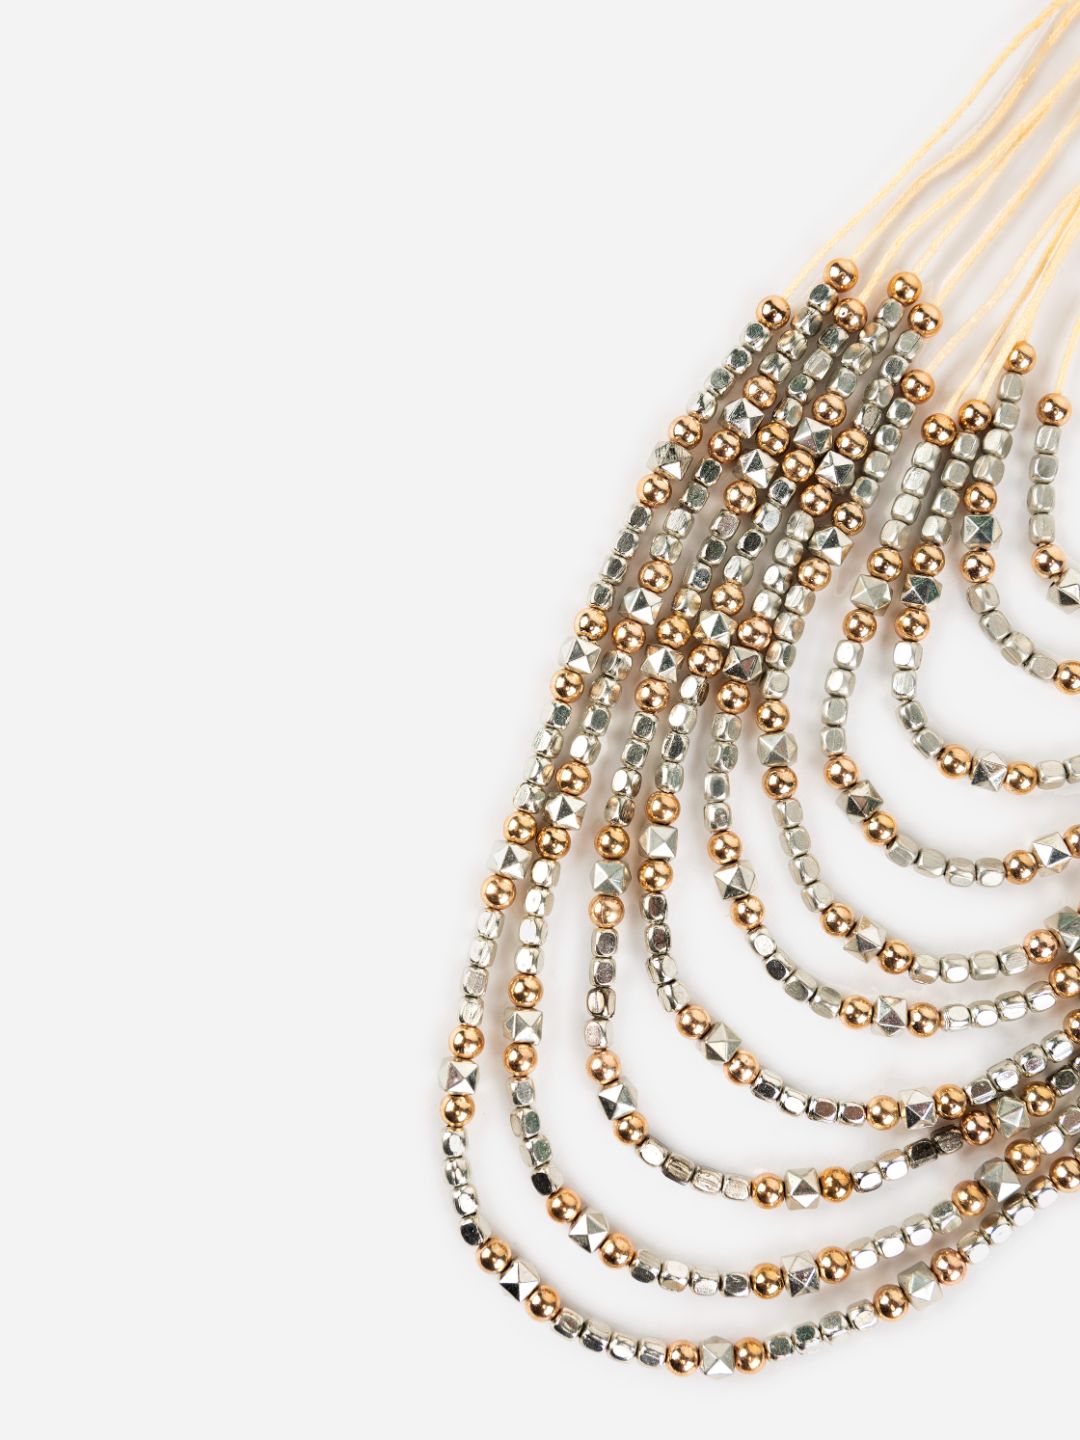 Multilayer Beaded Silver and Gold Threaded Necklace